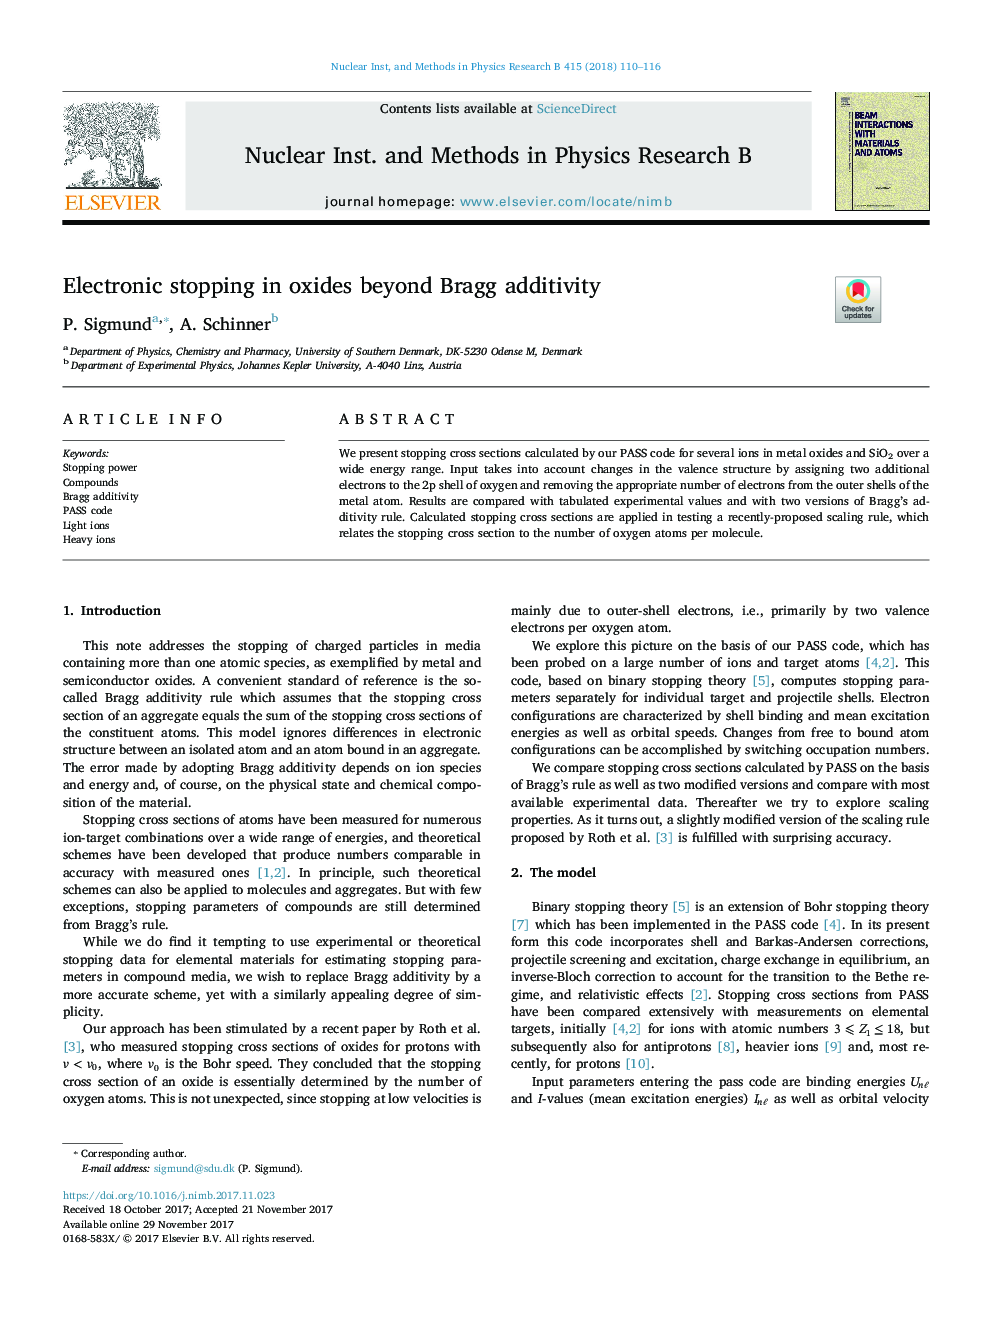 Electronic stopping in oxides beyond Bragg additivity